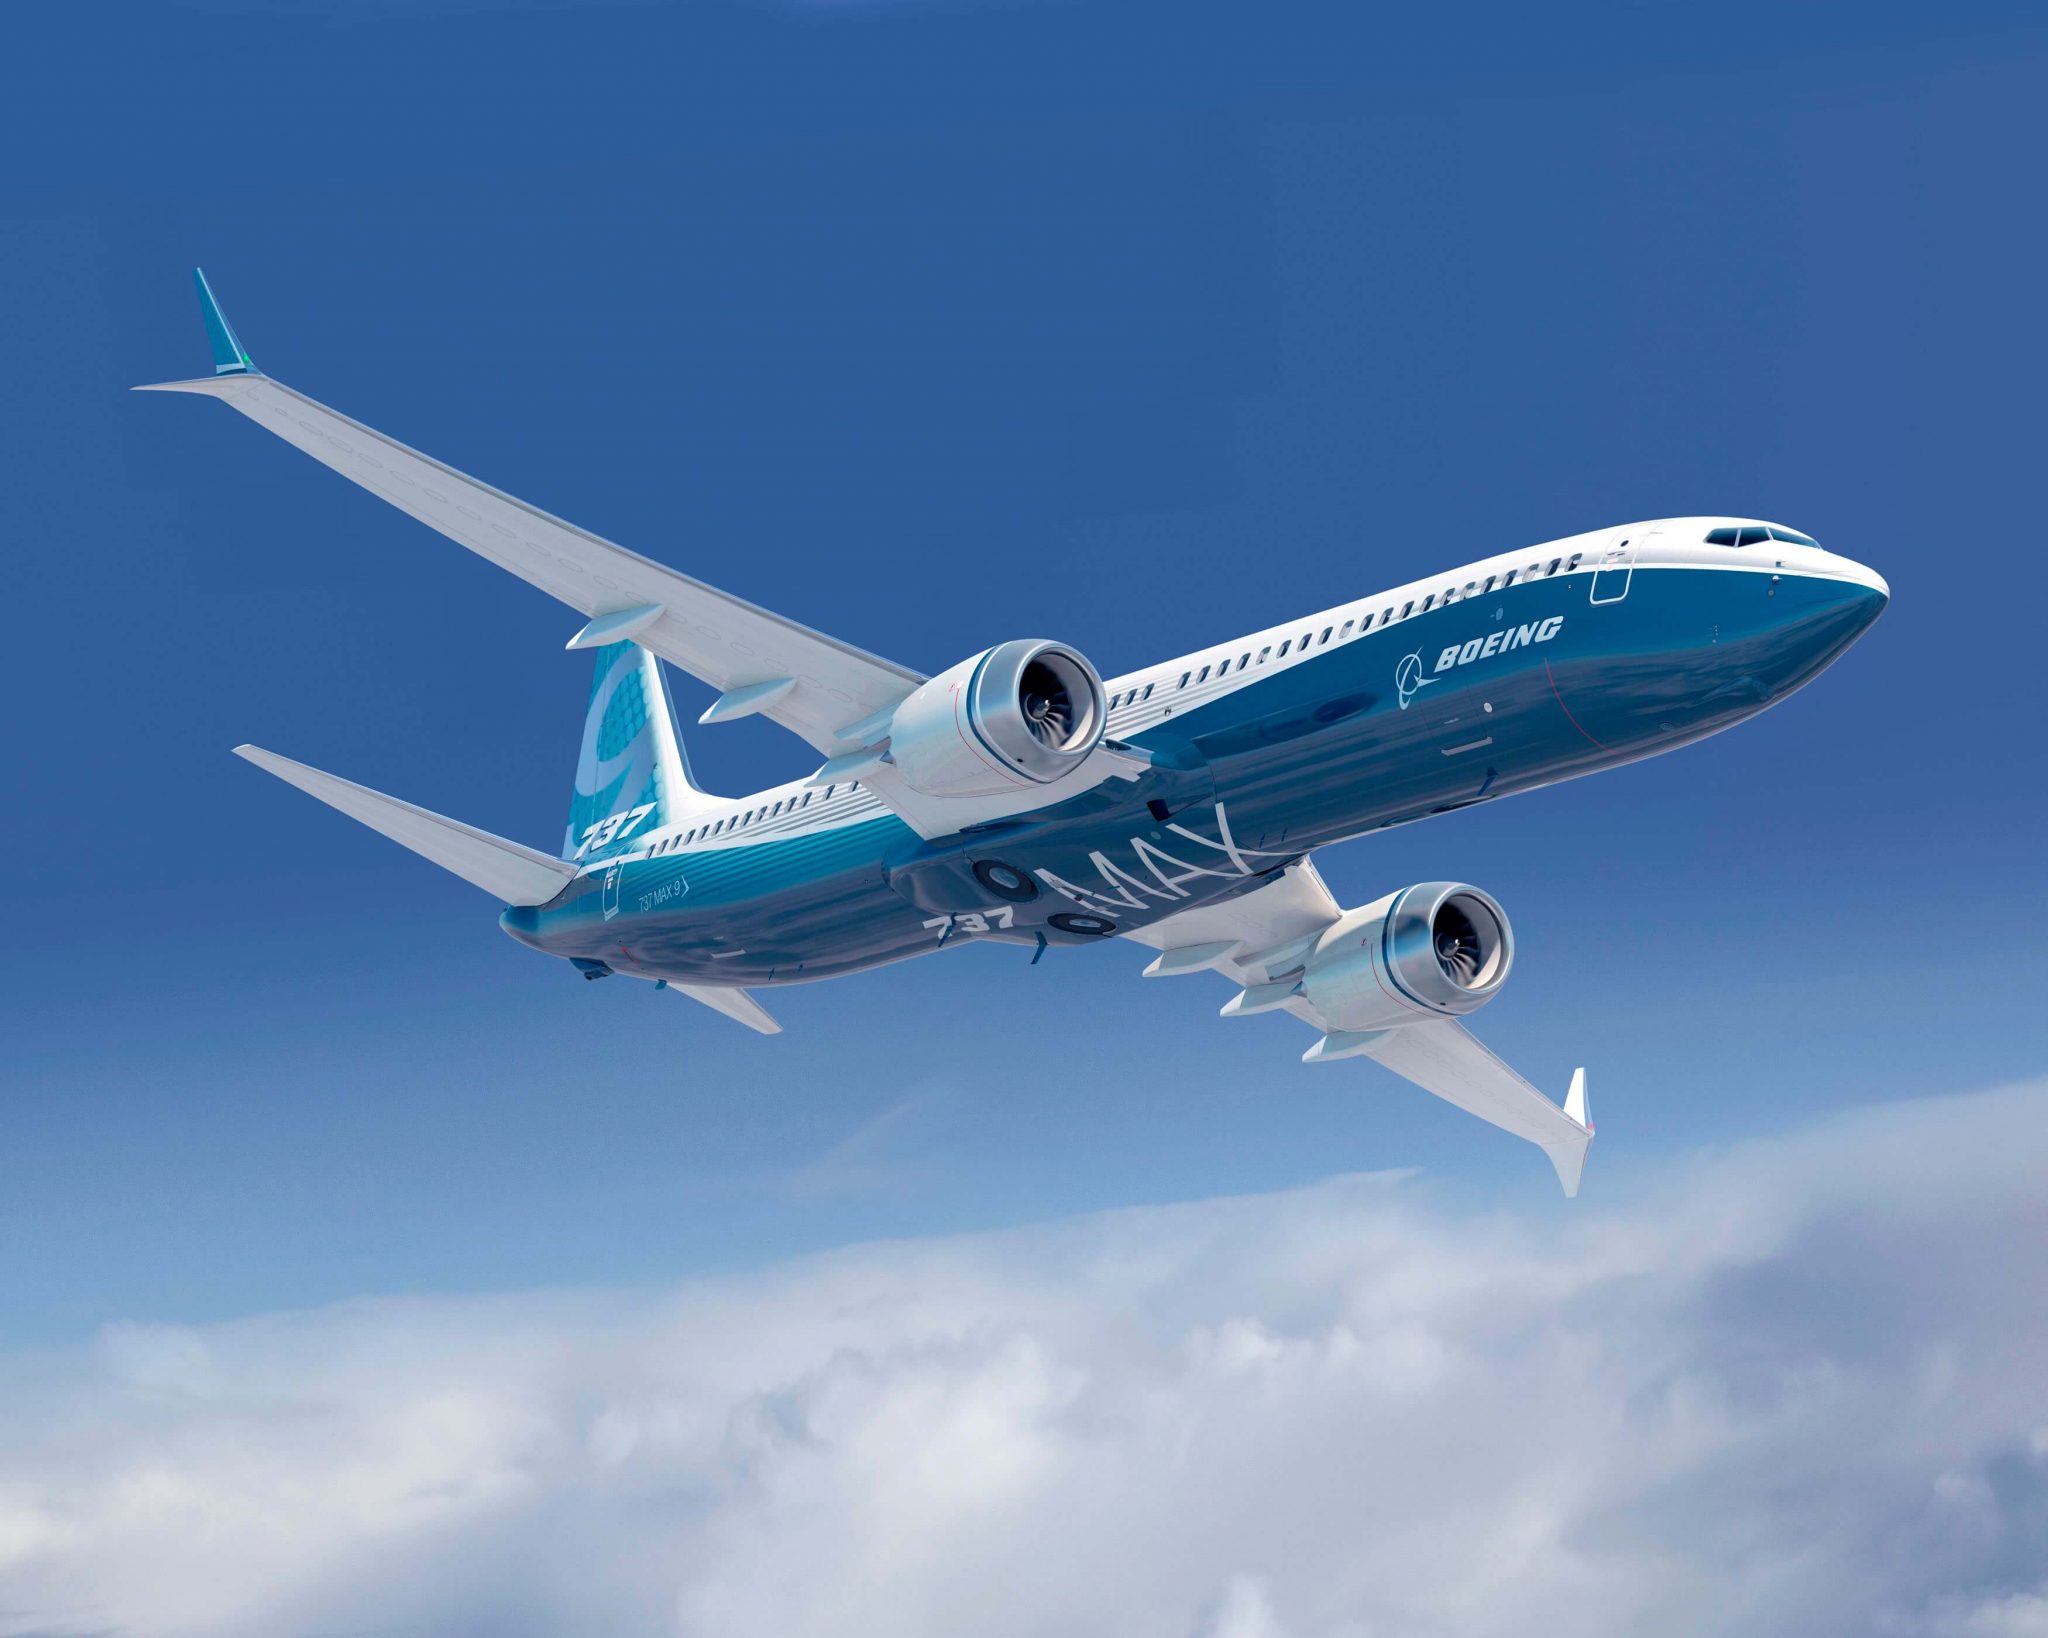 Head of Boeing 737 programme out in leadership shakeup